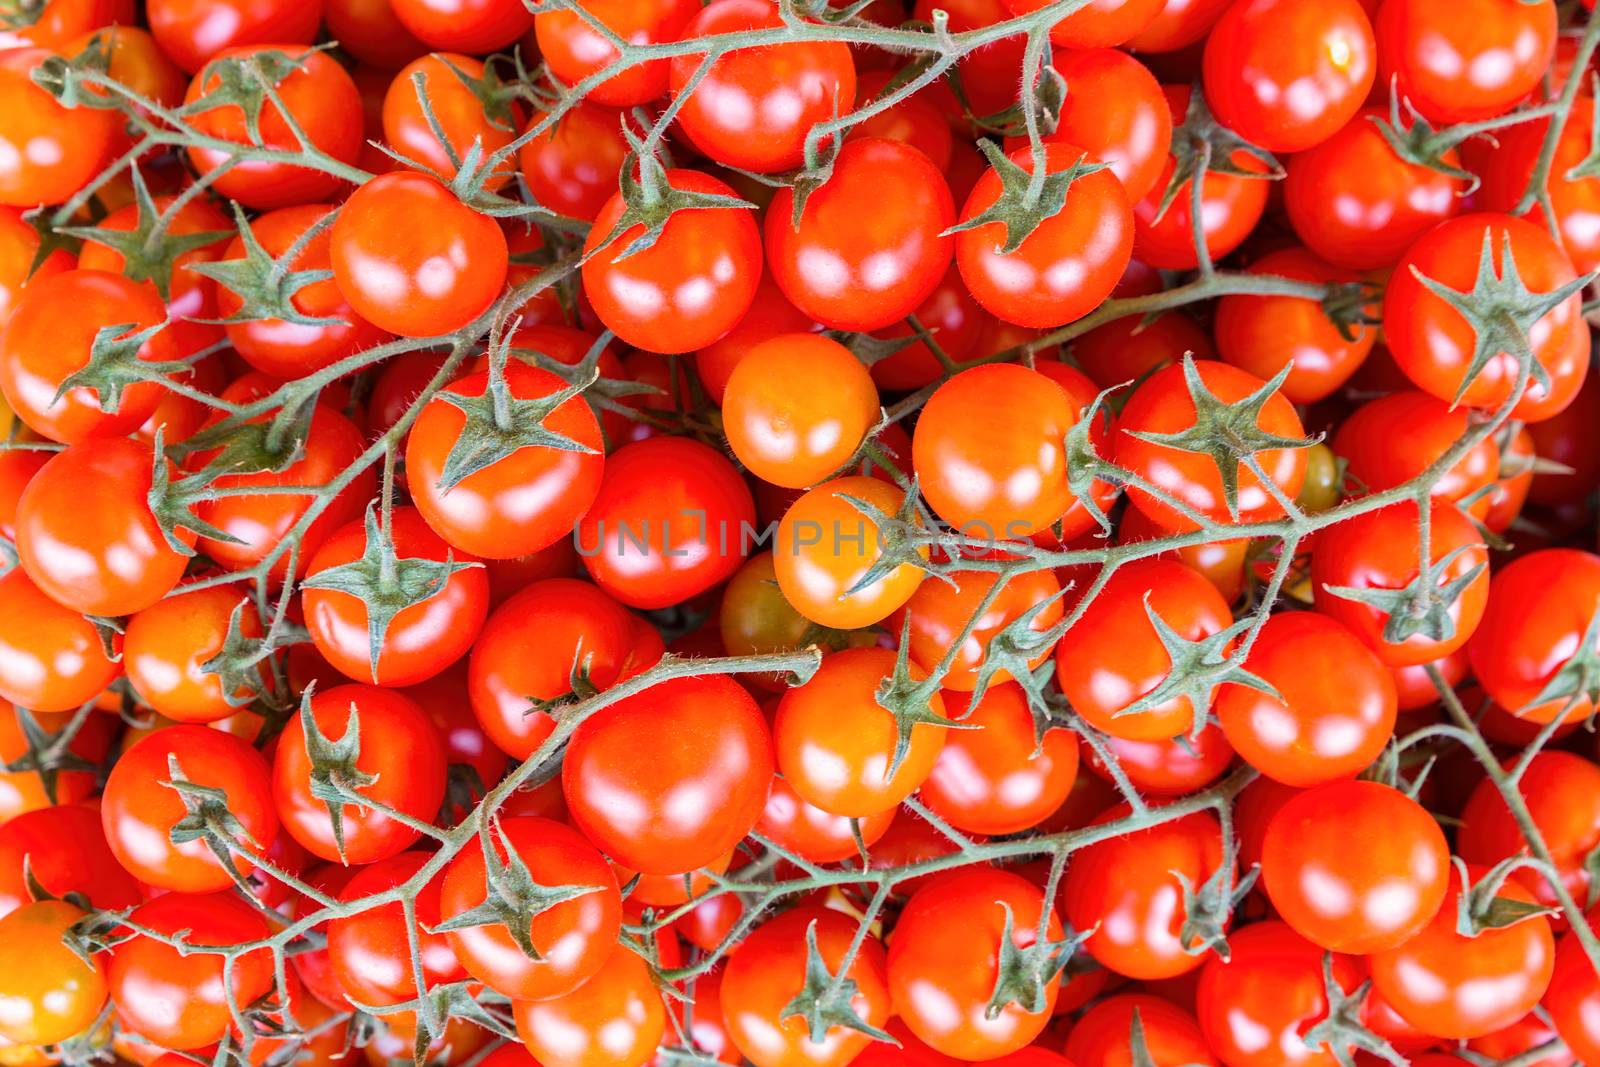 Many bunches of red vine tomatoes  by BenSchonewille